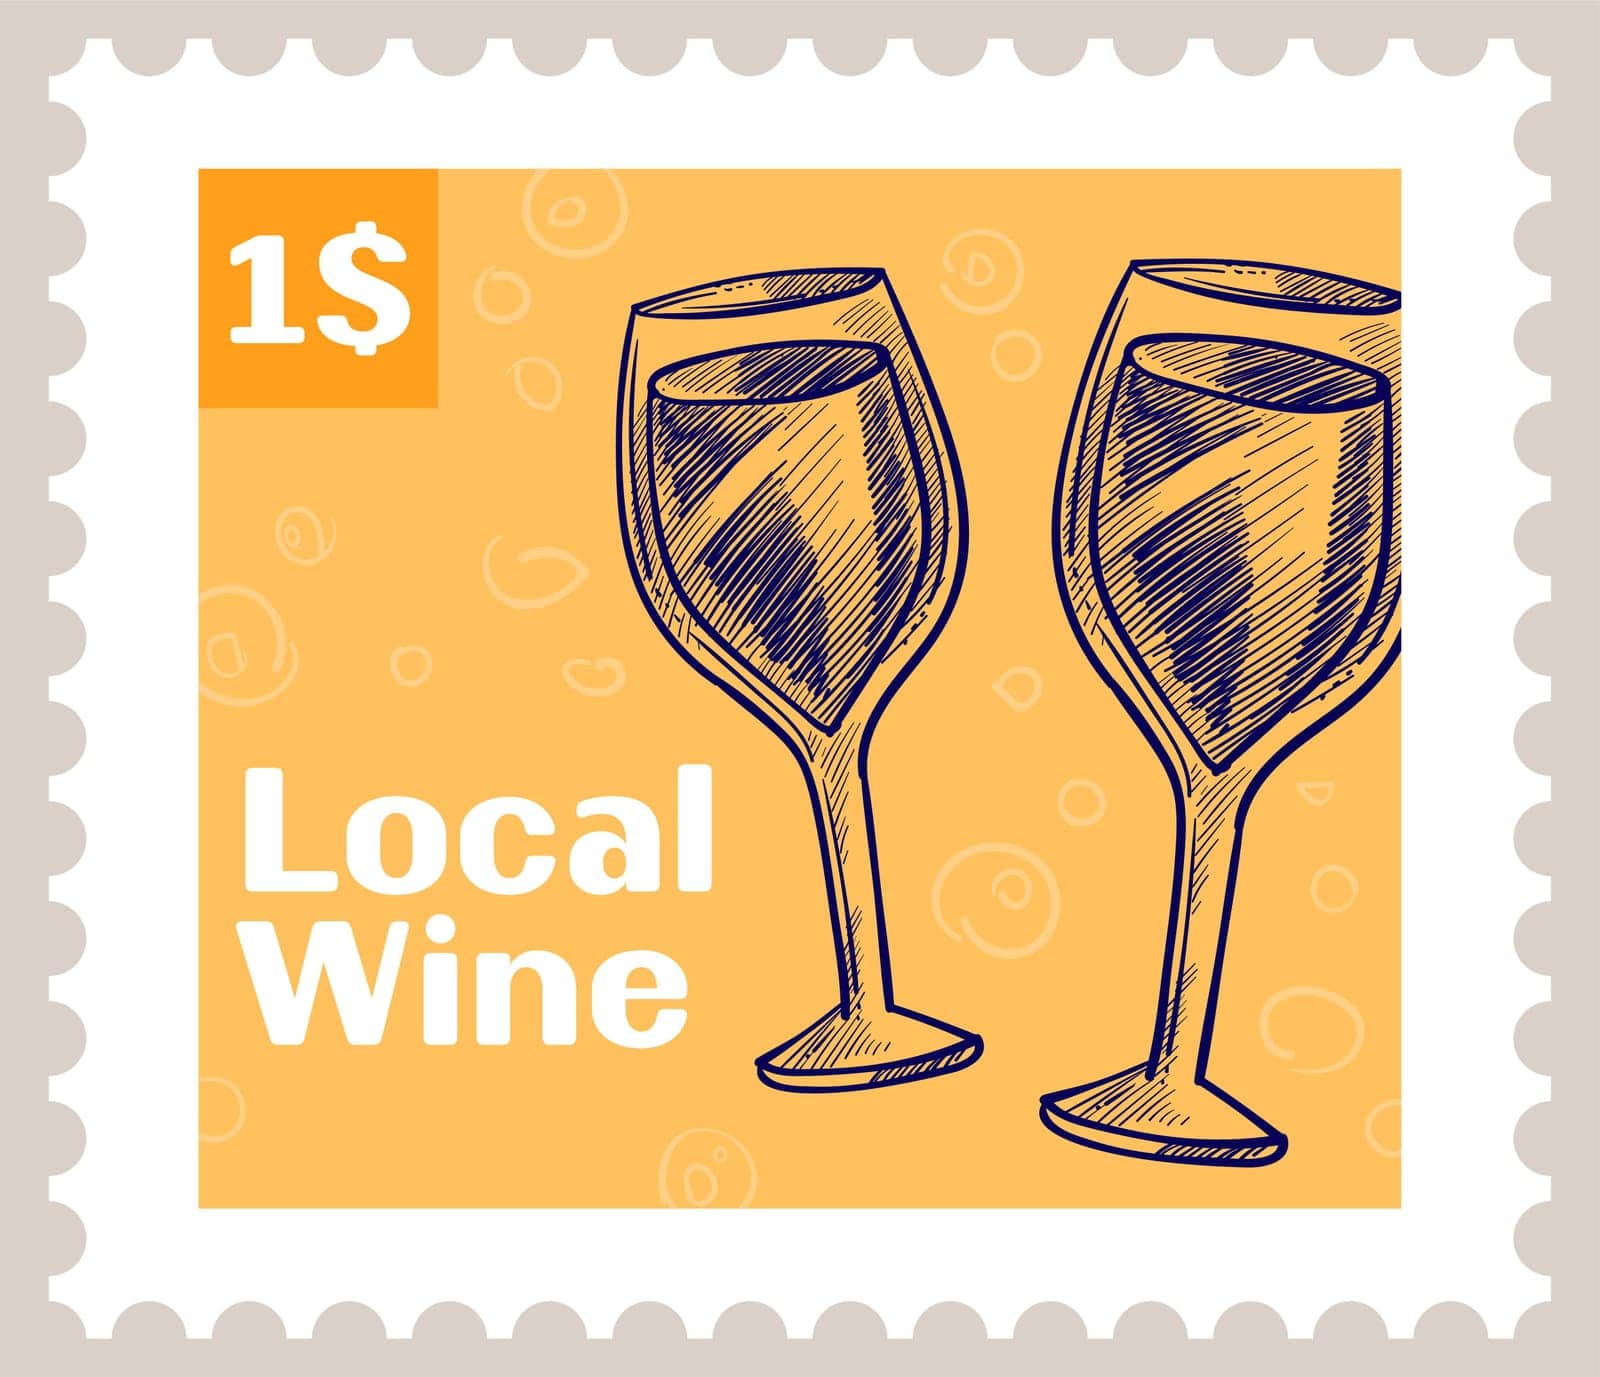 Local wine, glass of alcoholic beverage postmark by Sonulkaster